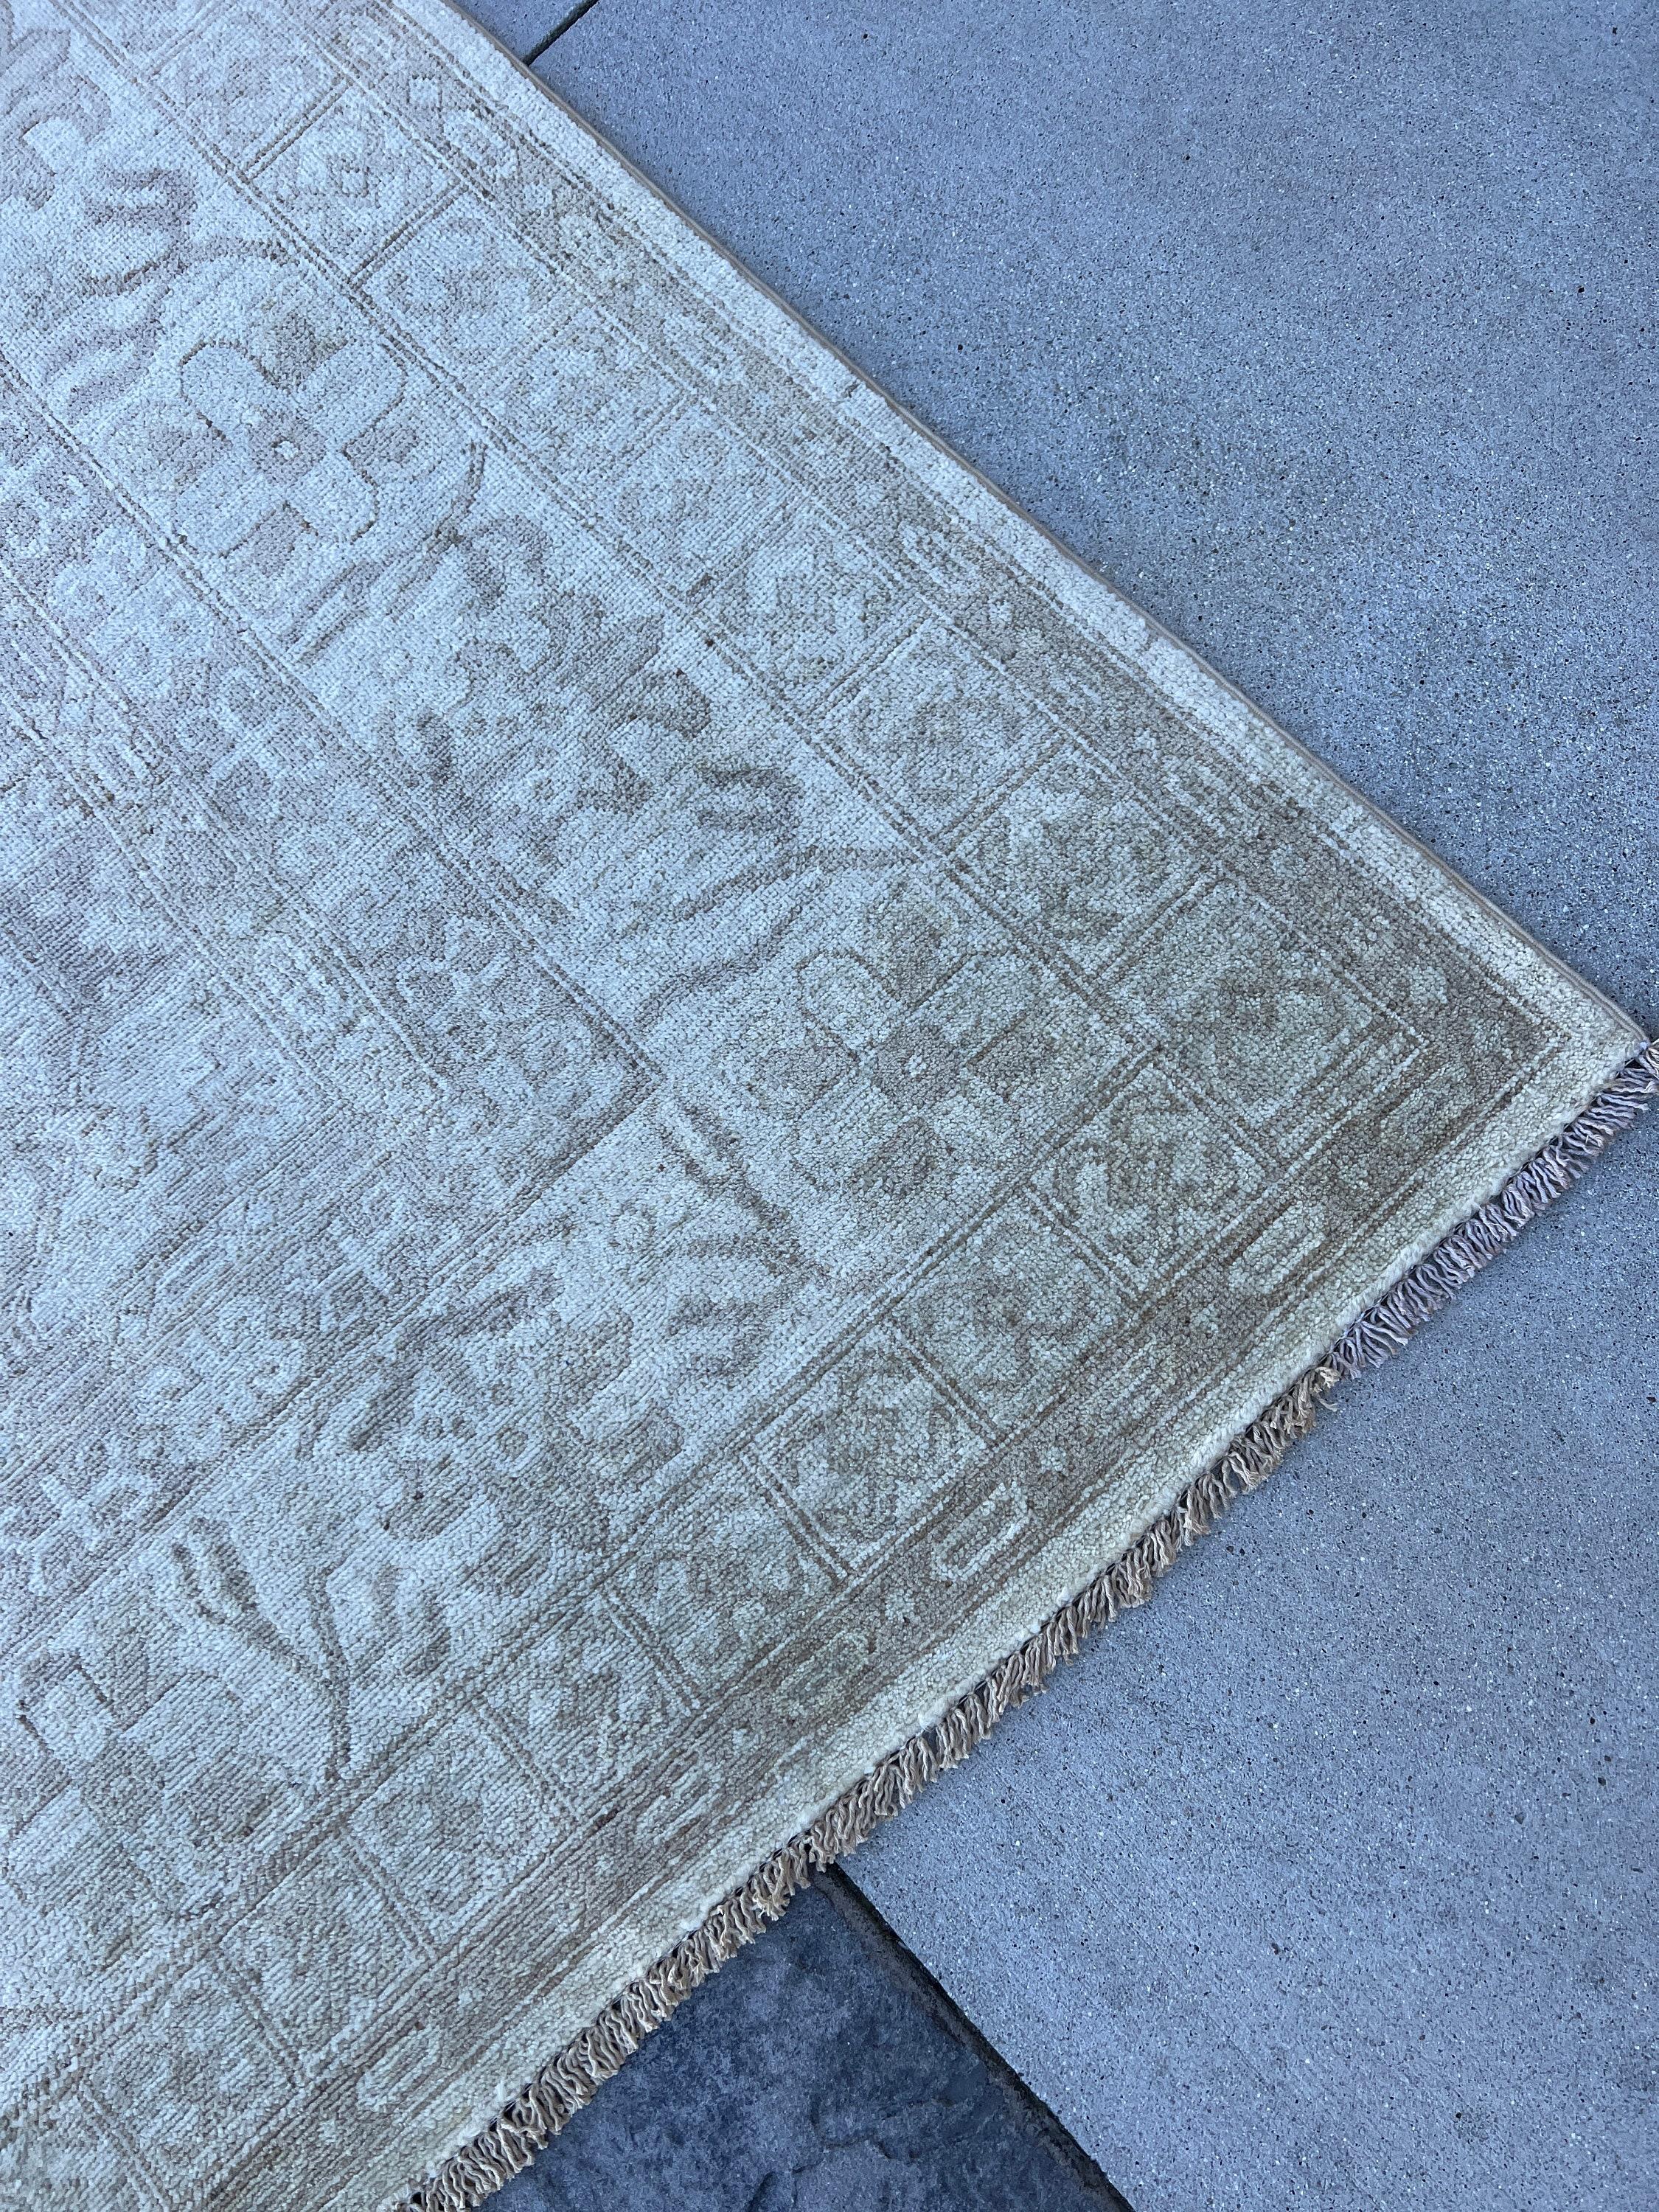 Hand-Knotted Afghan Rug Premium Hand-Spun Afghan Wool Muted Neutral For Sale 4